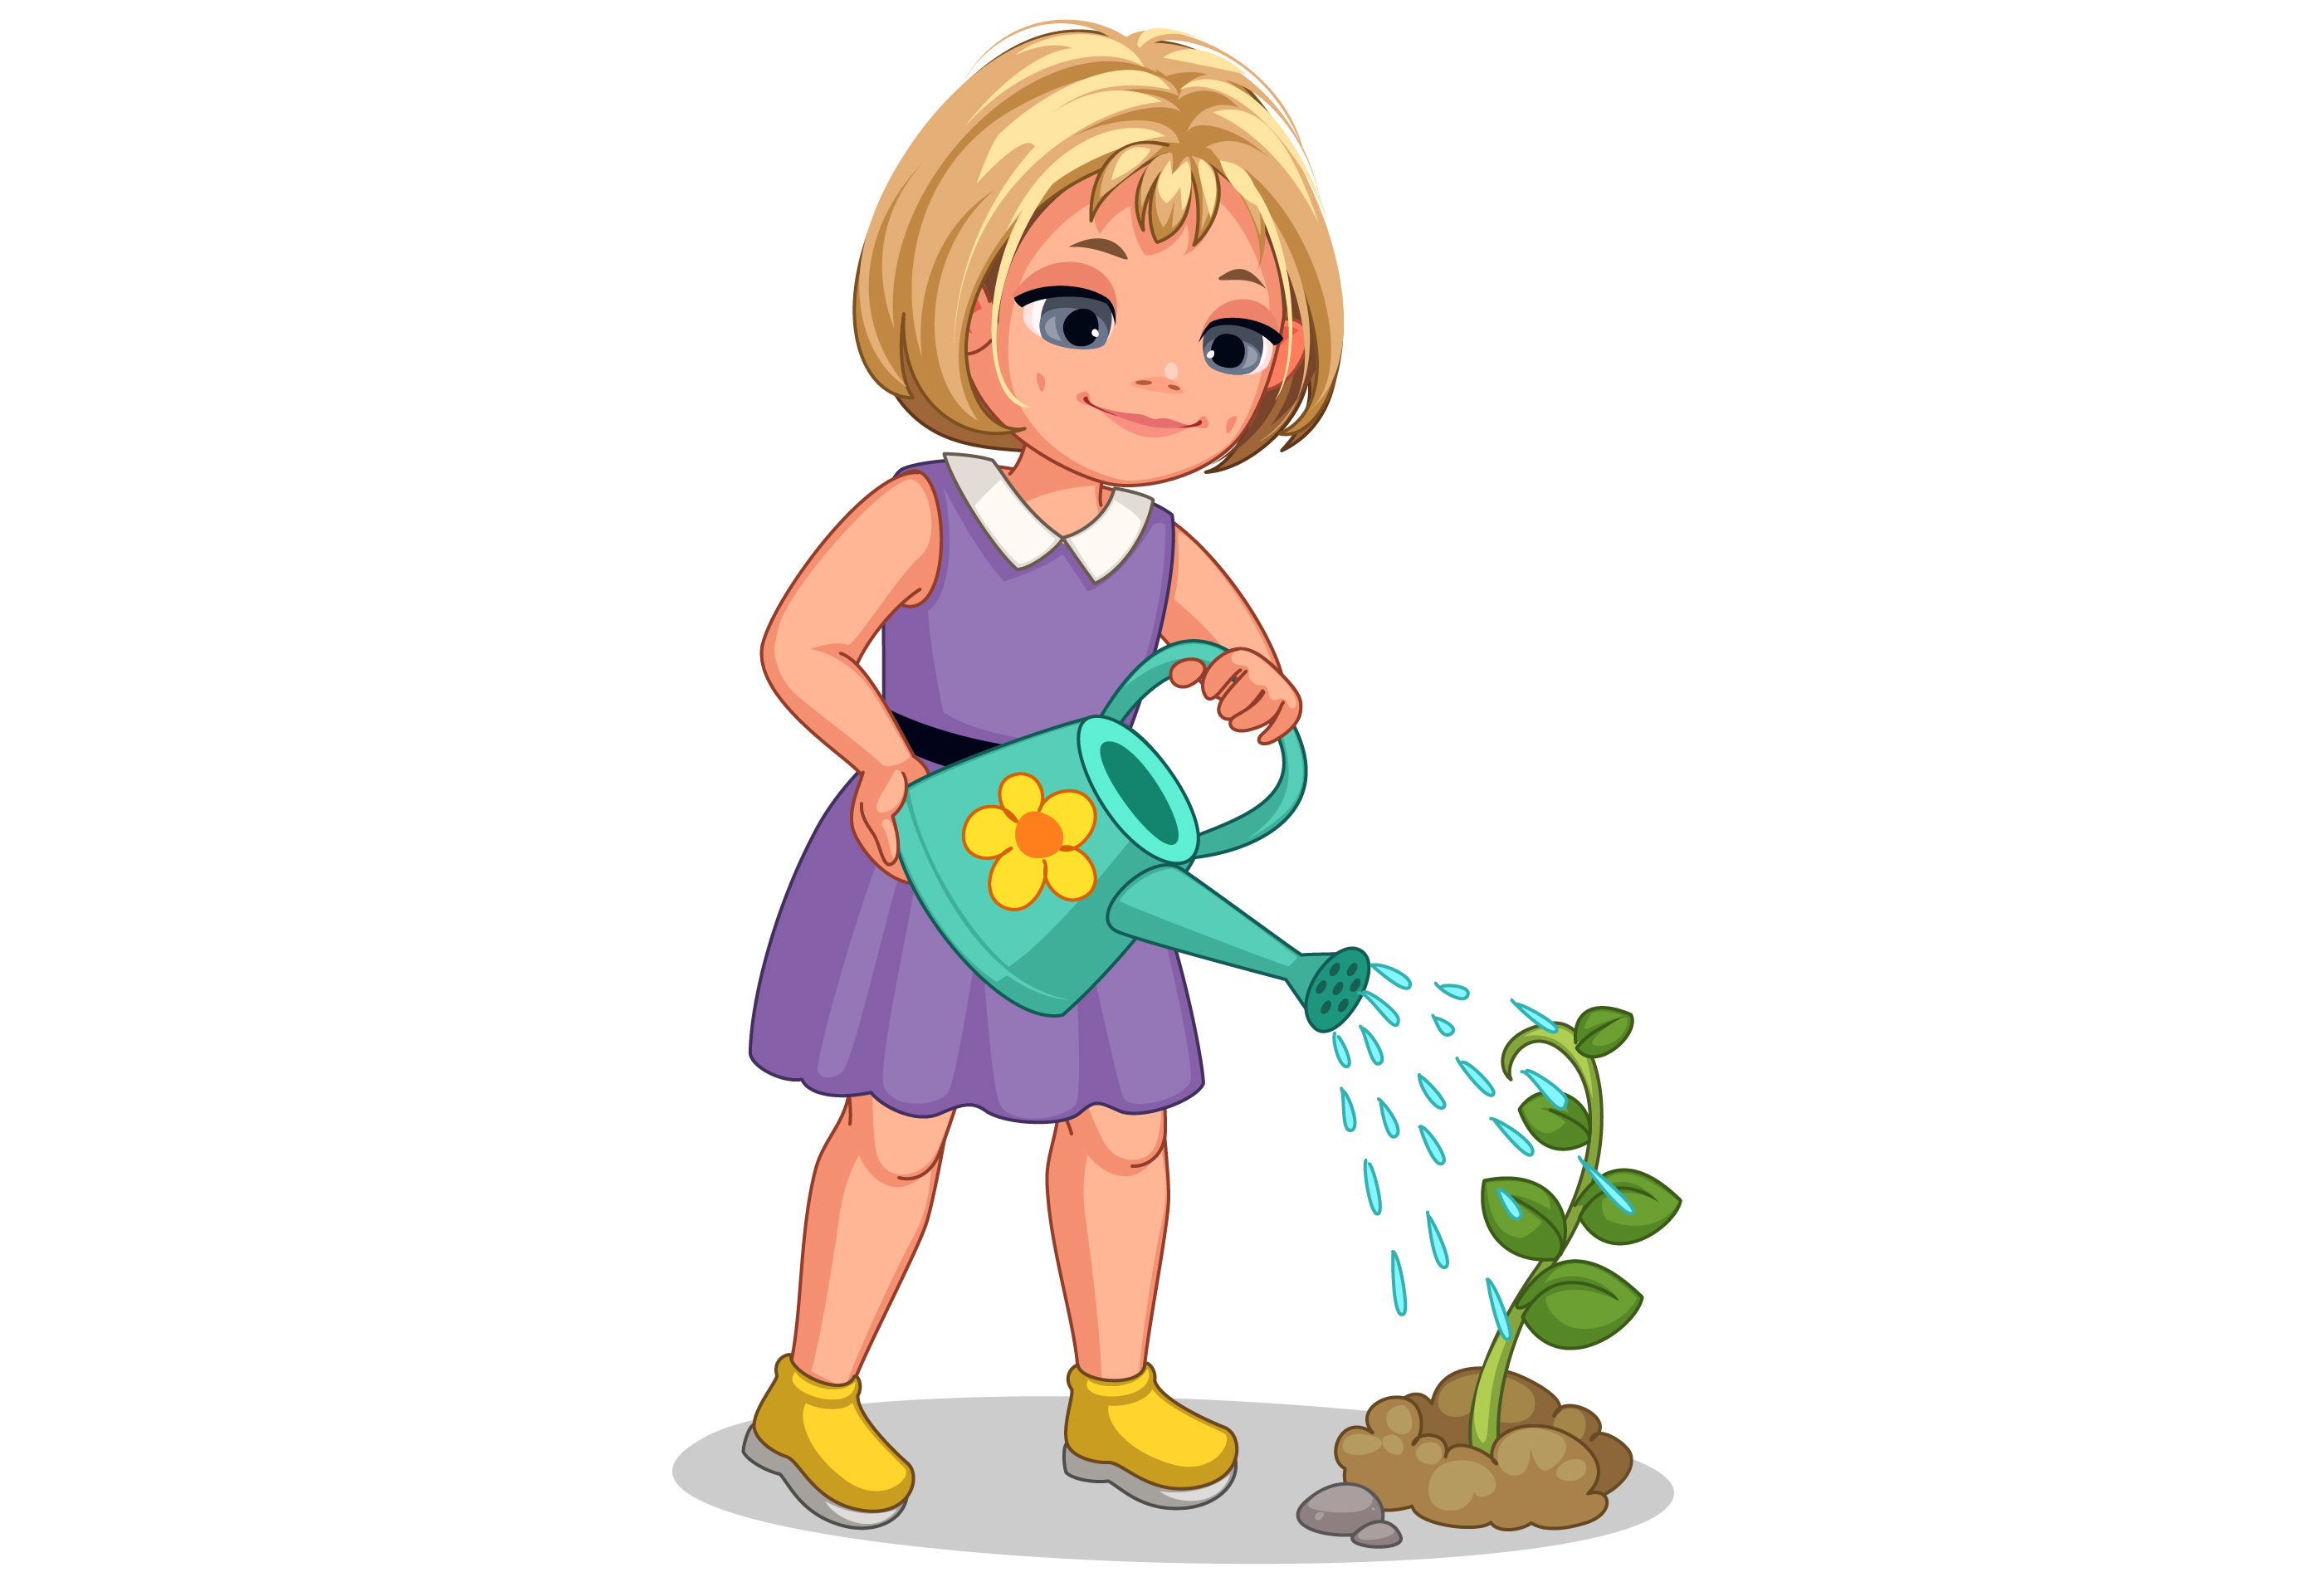 Cute Little Girl Watering The Plant Download Free Vectors Clipart Graphics Vector Art Watering plants vector clipart and illustrations (78,932). cute little girl watering the plant